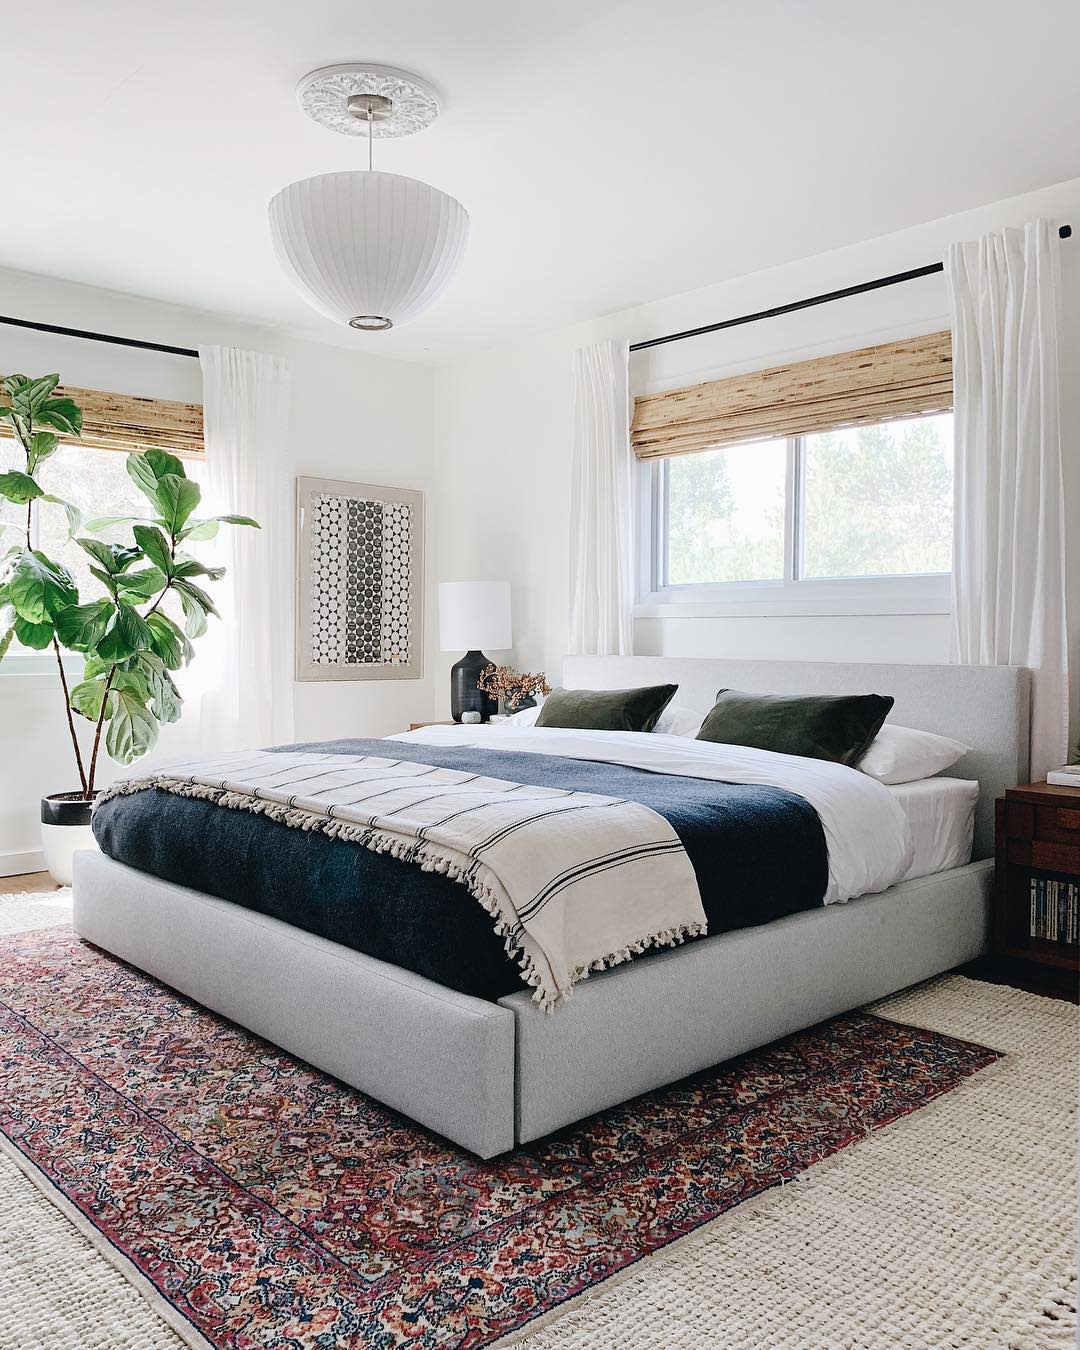 White Walls painted in Whipped, a warm white paint color by Clare, make this bedroom feel warm and inviting.  Lots of texture and plants add a cozy vibe. 